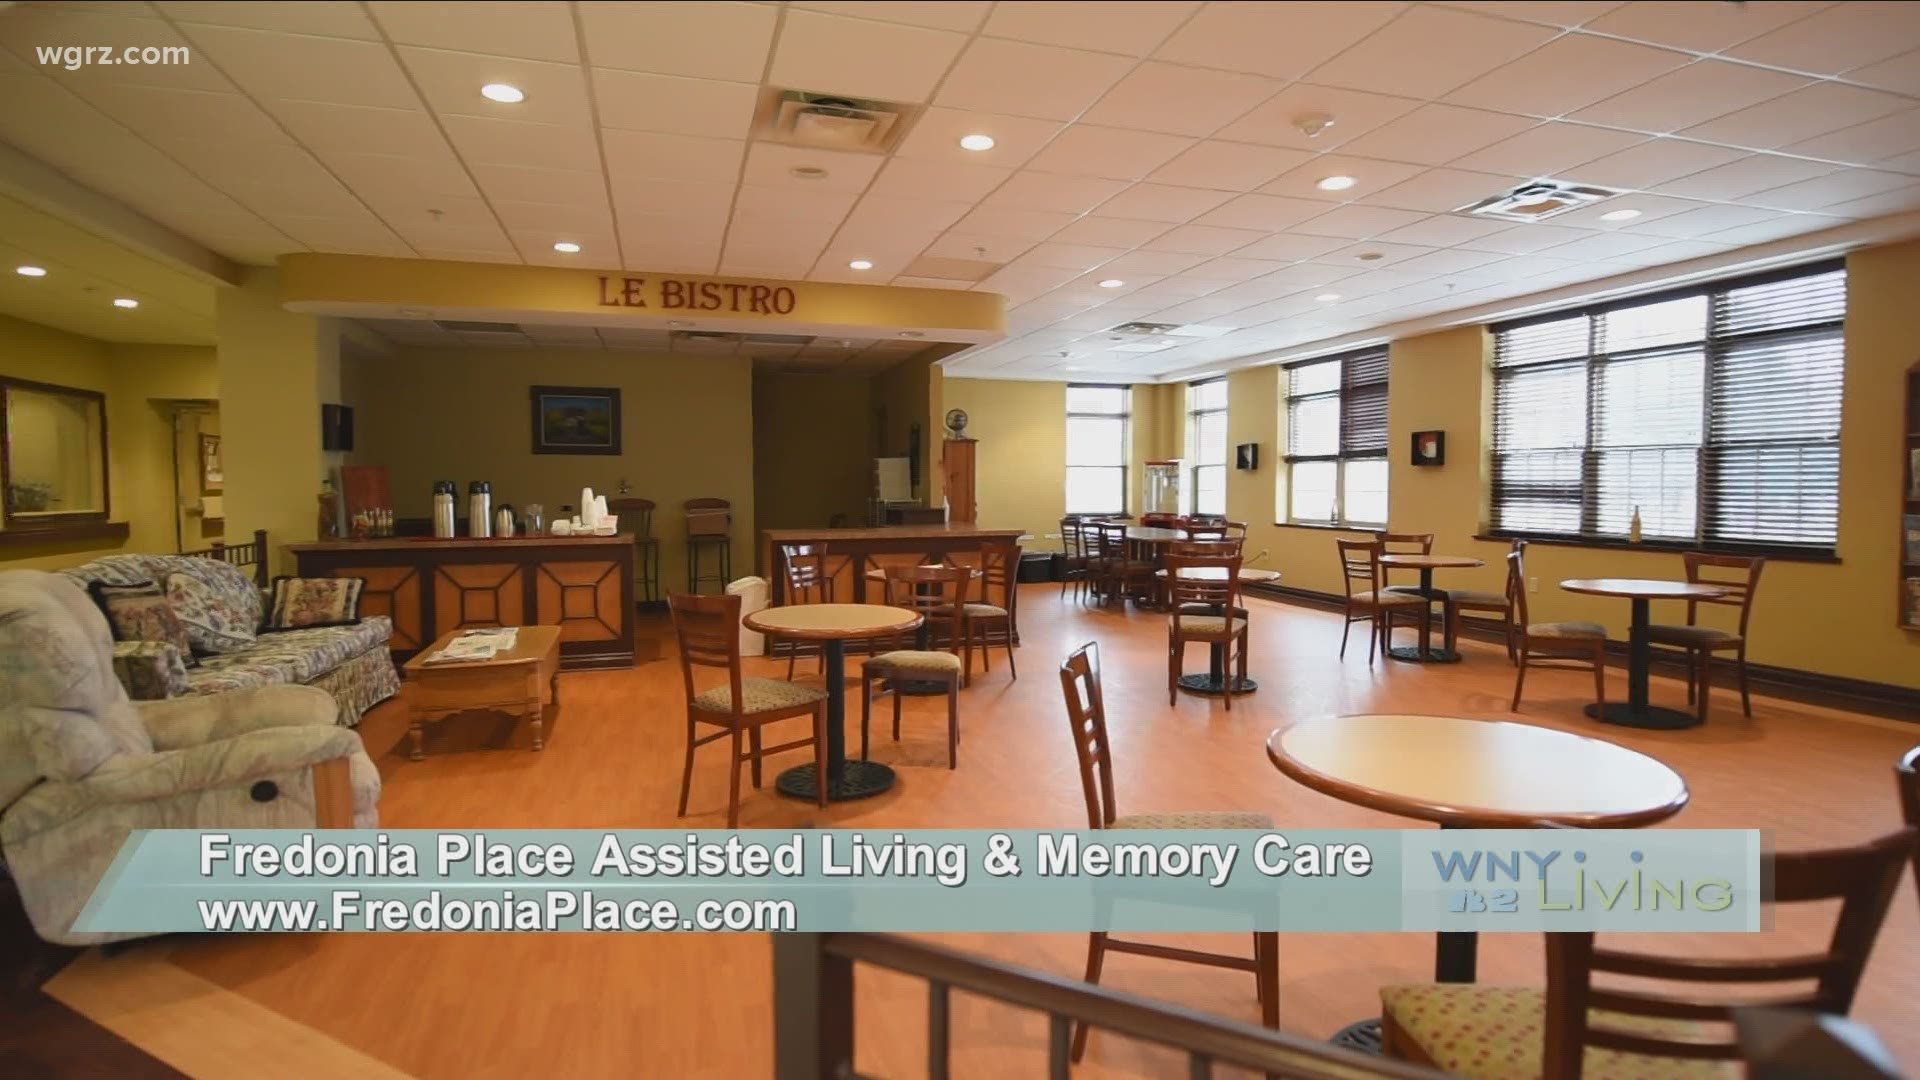 WNY Living - October 17 - Fredonia Place Assisted Living & Memory Care (THIS VIDEO IS SPONSORED BY FREDONIA PLACE ASSISTED LIVING & MEMORY CARE)